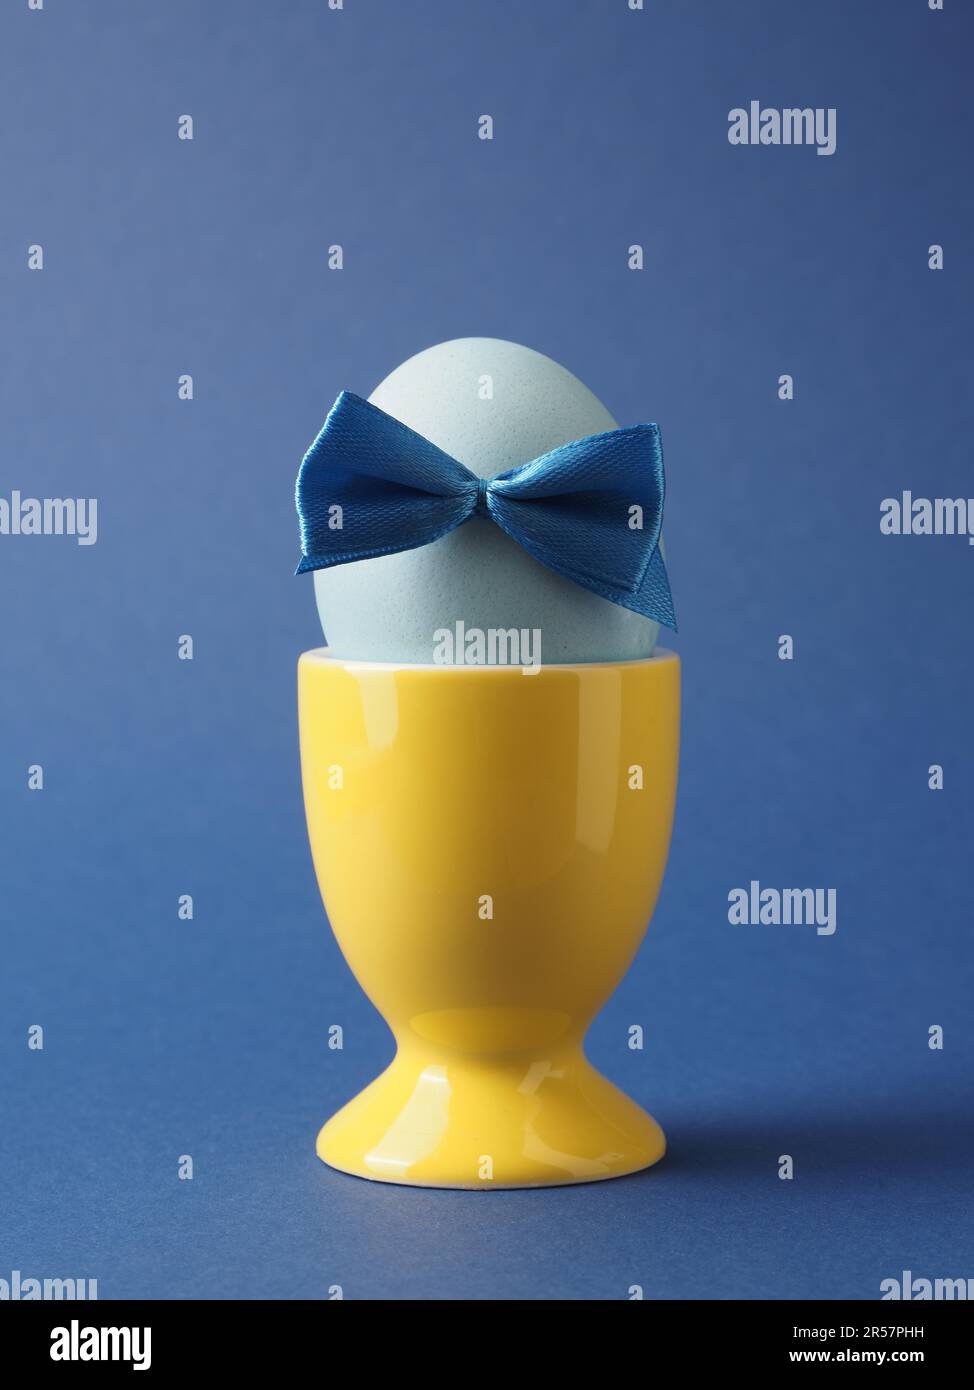 Organic Easter egg with a blue bow in a yellow egg cup on a blue background, happy Easter background Stock Photo